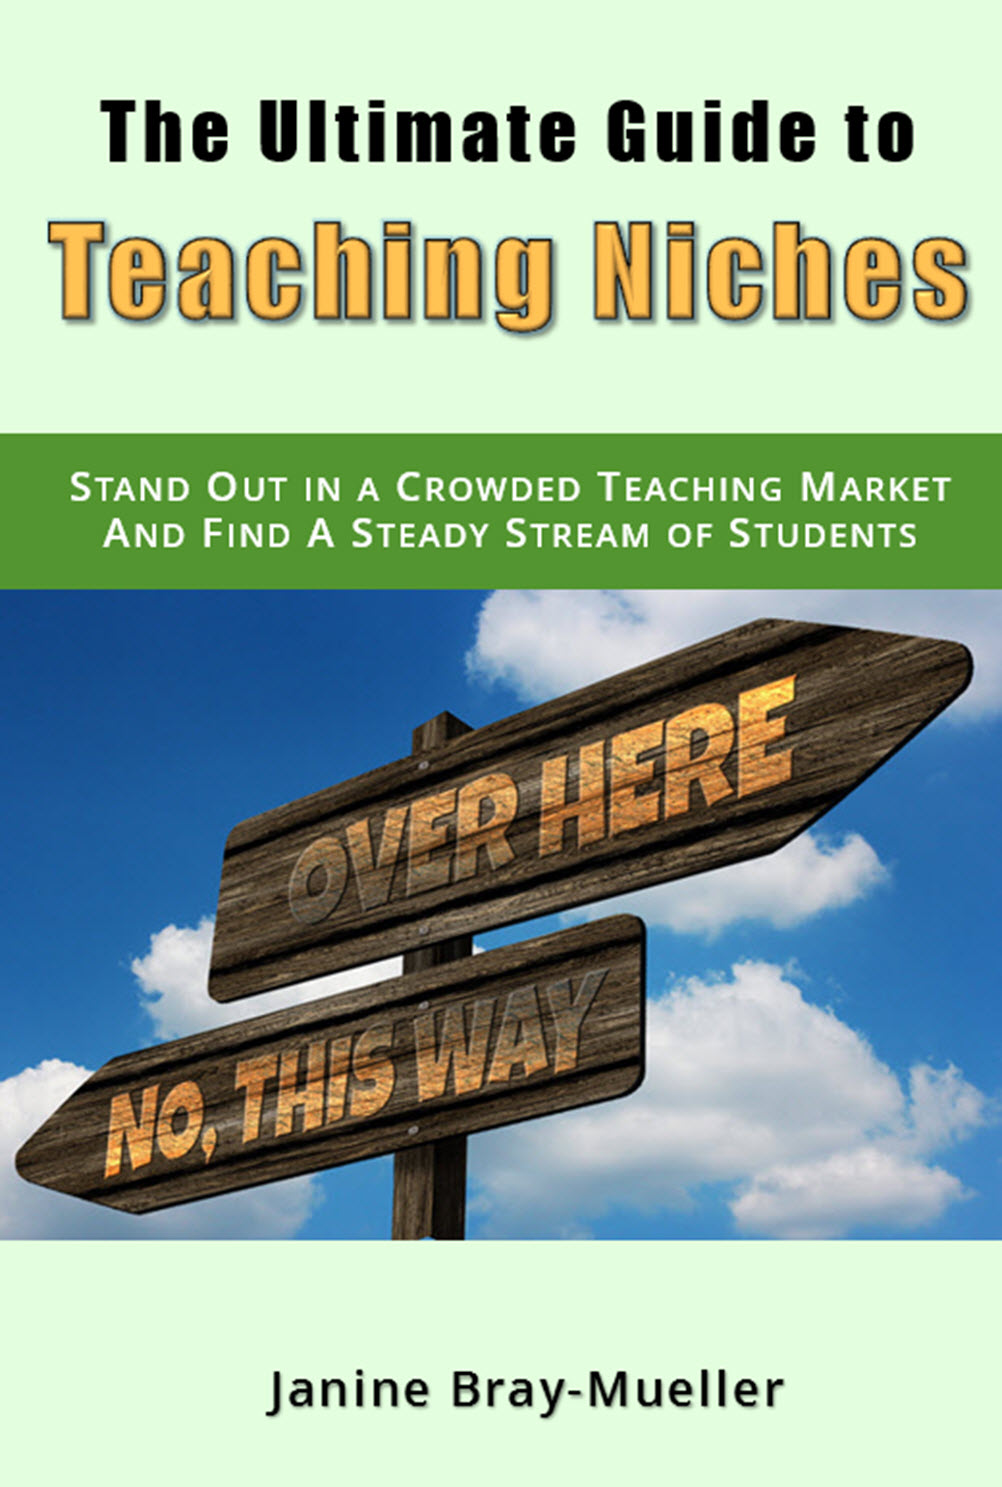 TEST The Ultimate Guide to Teaching Niches Janine Bray-Mueller Book Cover